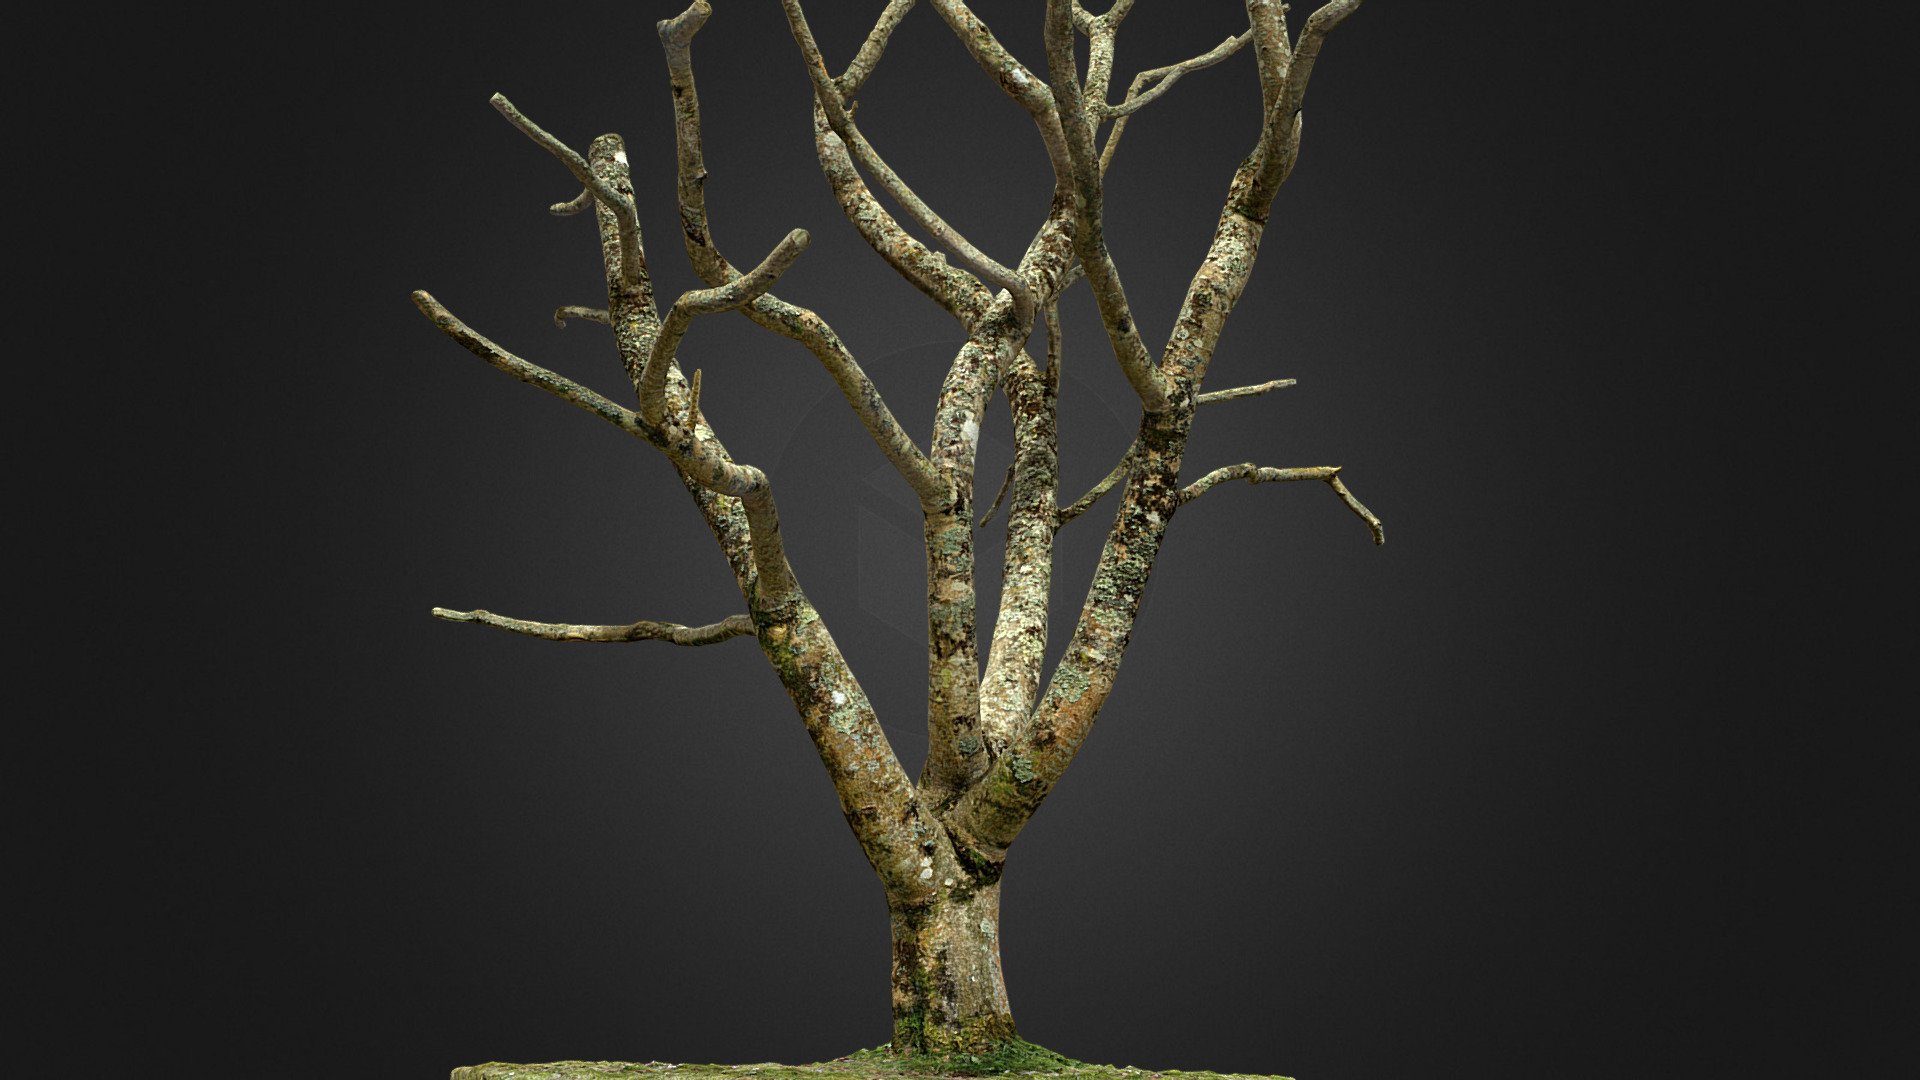 Magnolia campbelli Darjeeling

Reconstructed in 3D using photogrammetry

107366 triangles

8k textures (color, normal,occlusion)

Format .blend and .obj - Magnolia tree trunk - Buy Royalty Free 3D model by jemian29 3d model